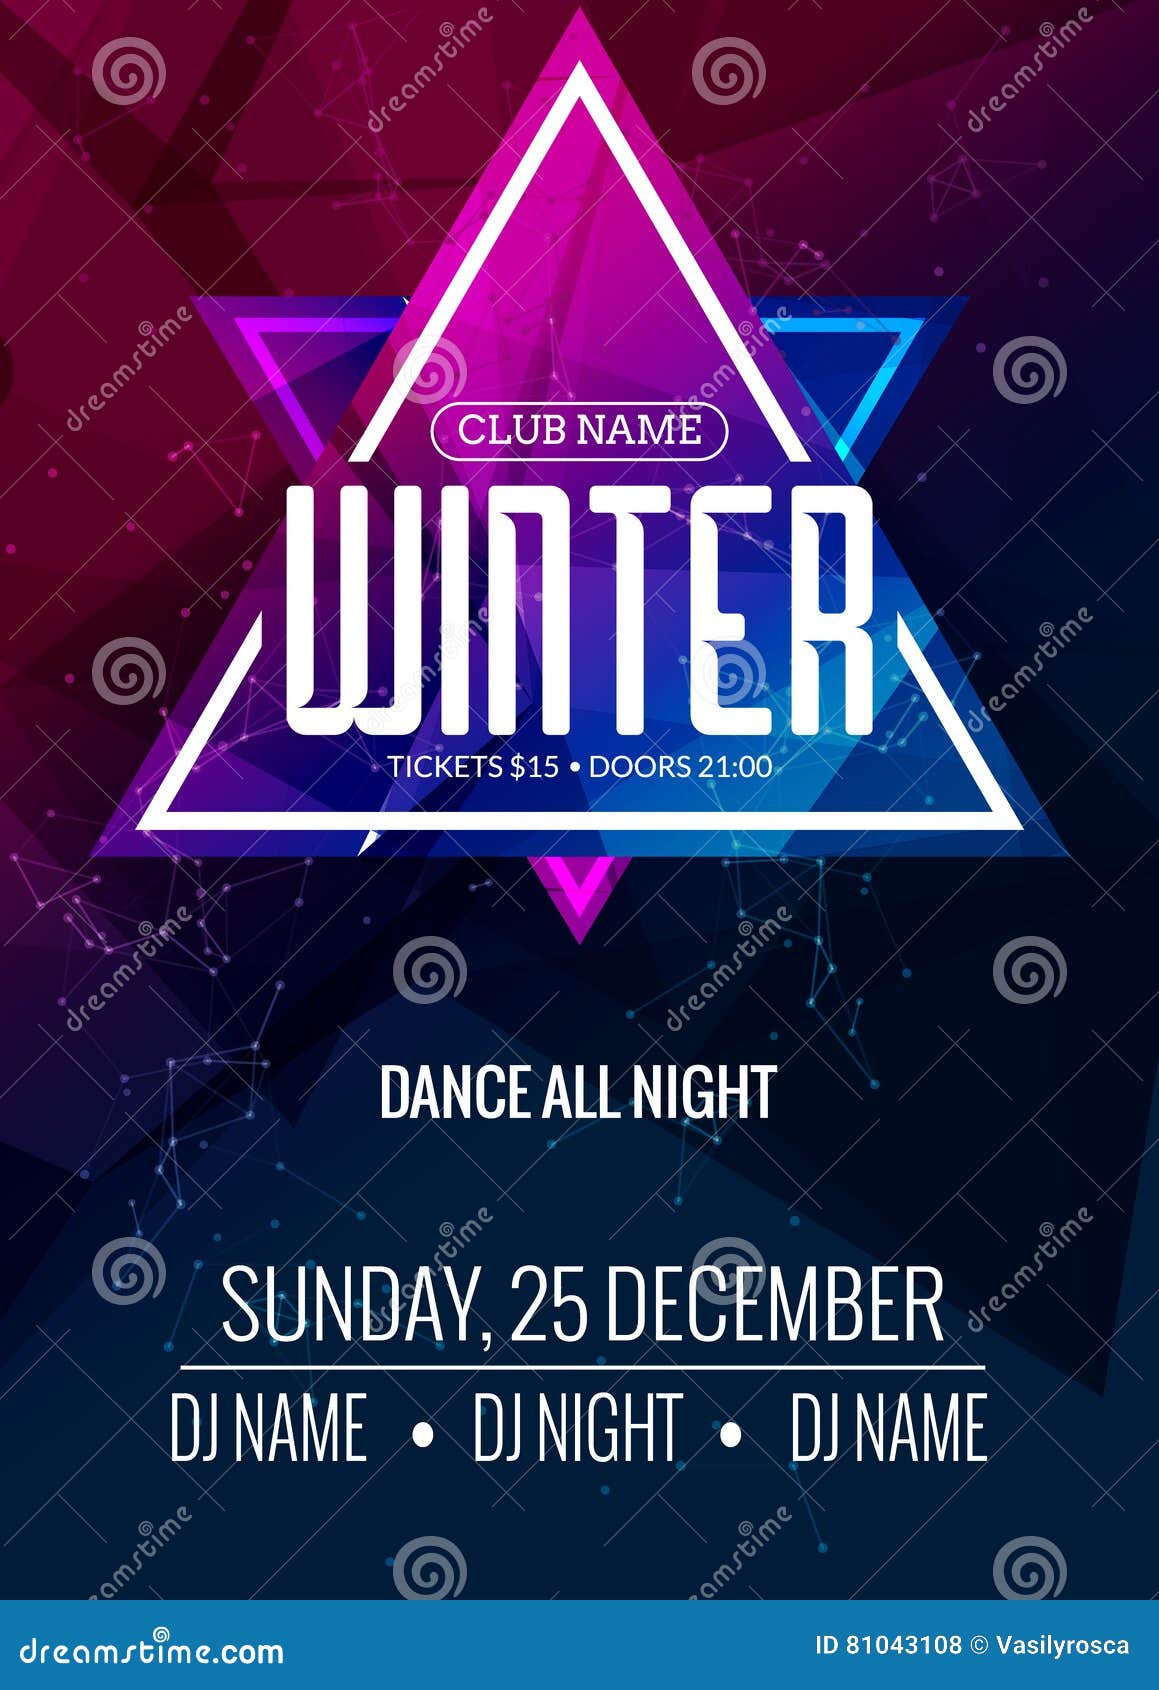 Dance Party Dj Battle Poster Design Winter Disco Party Music Event Flyer Or Banner Illustration Template Stock Vector Illustration Of Cold Musical